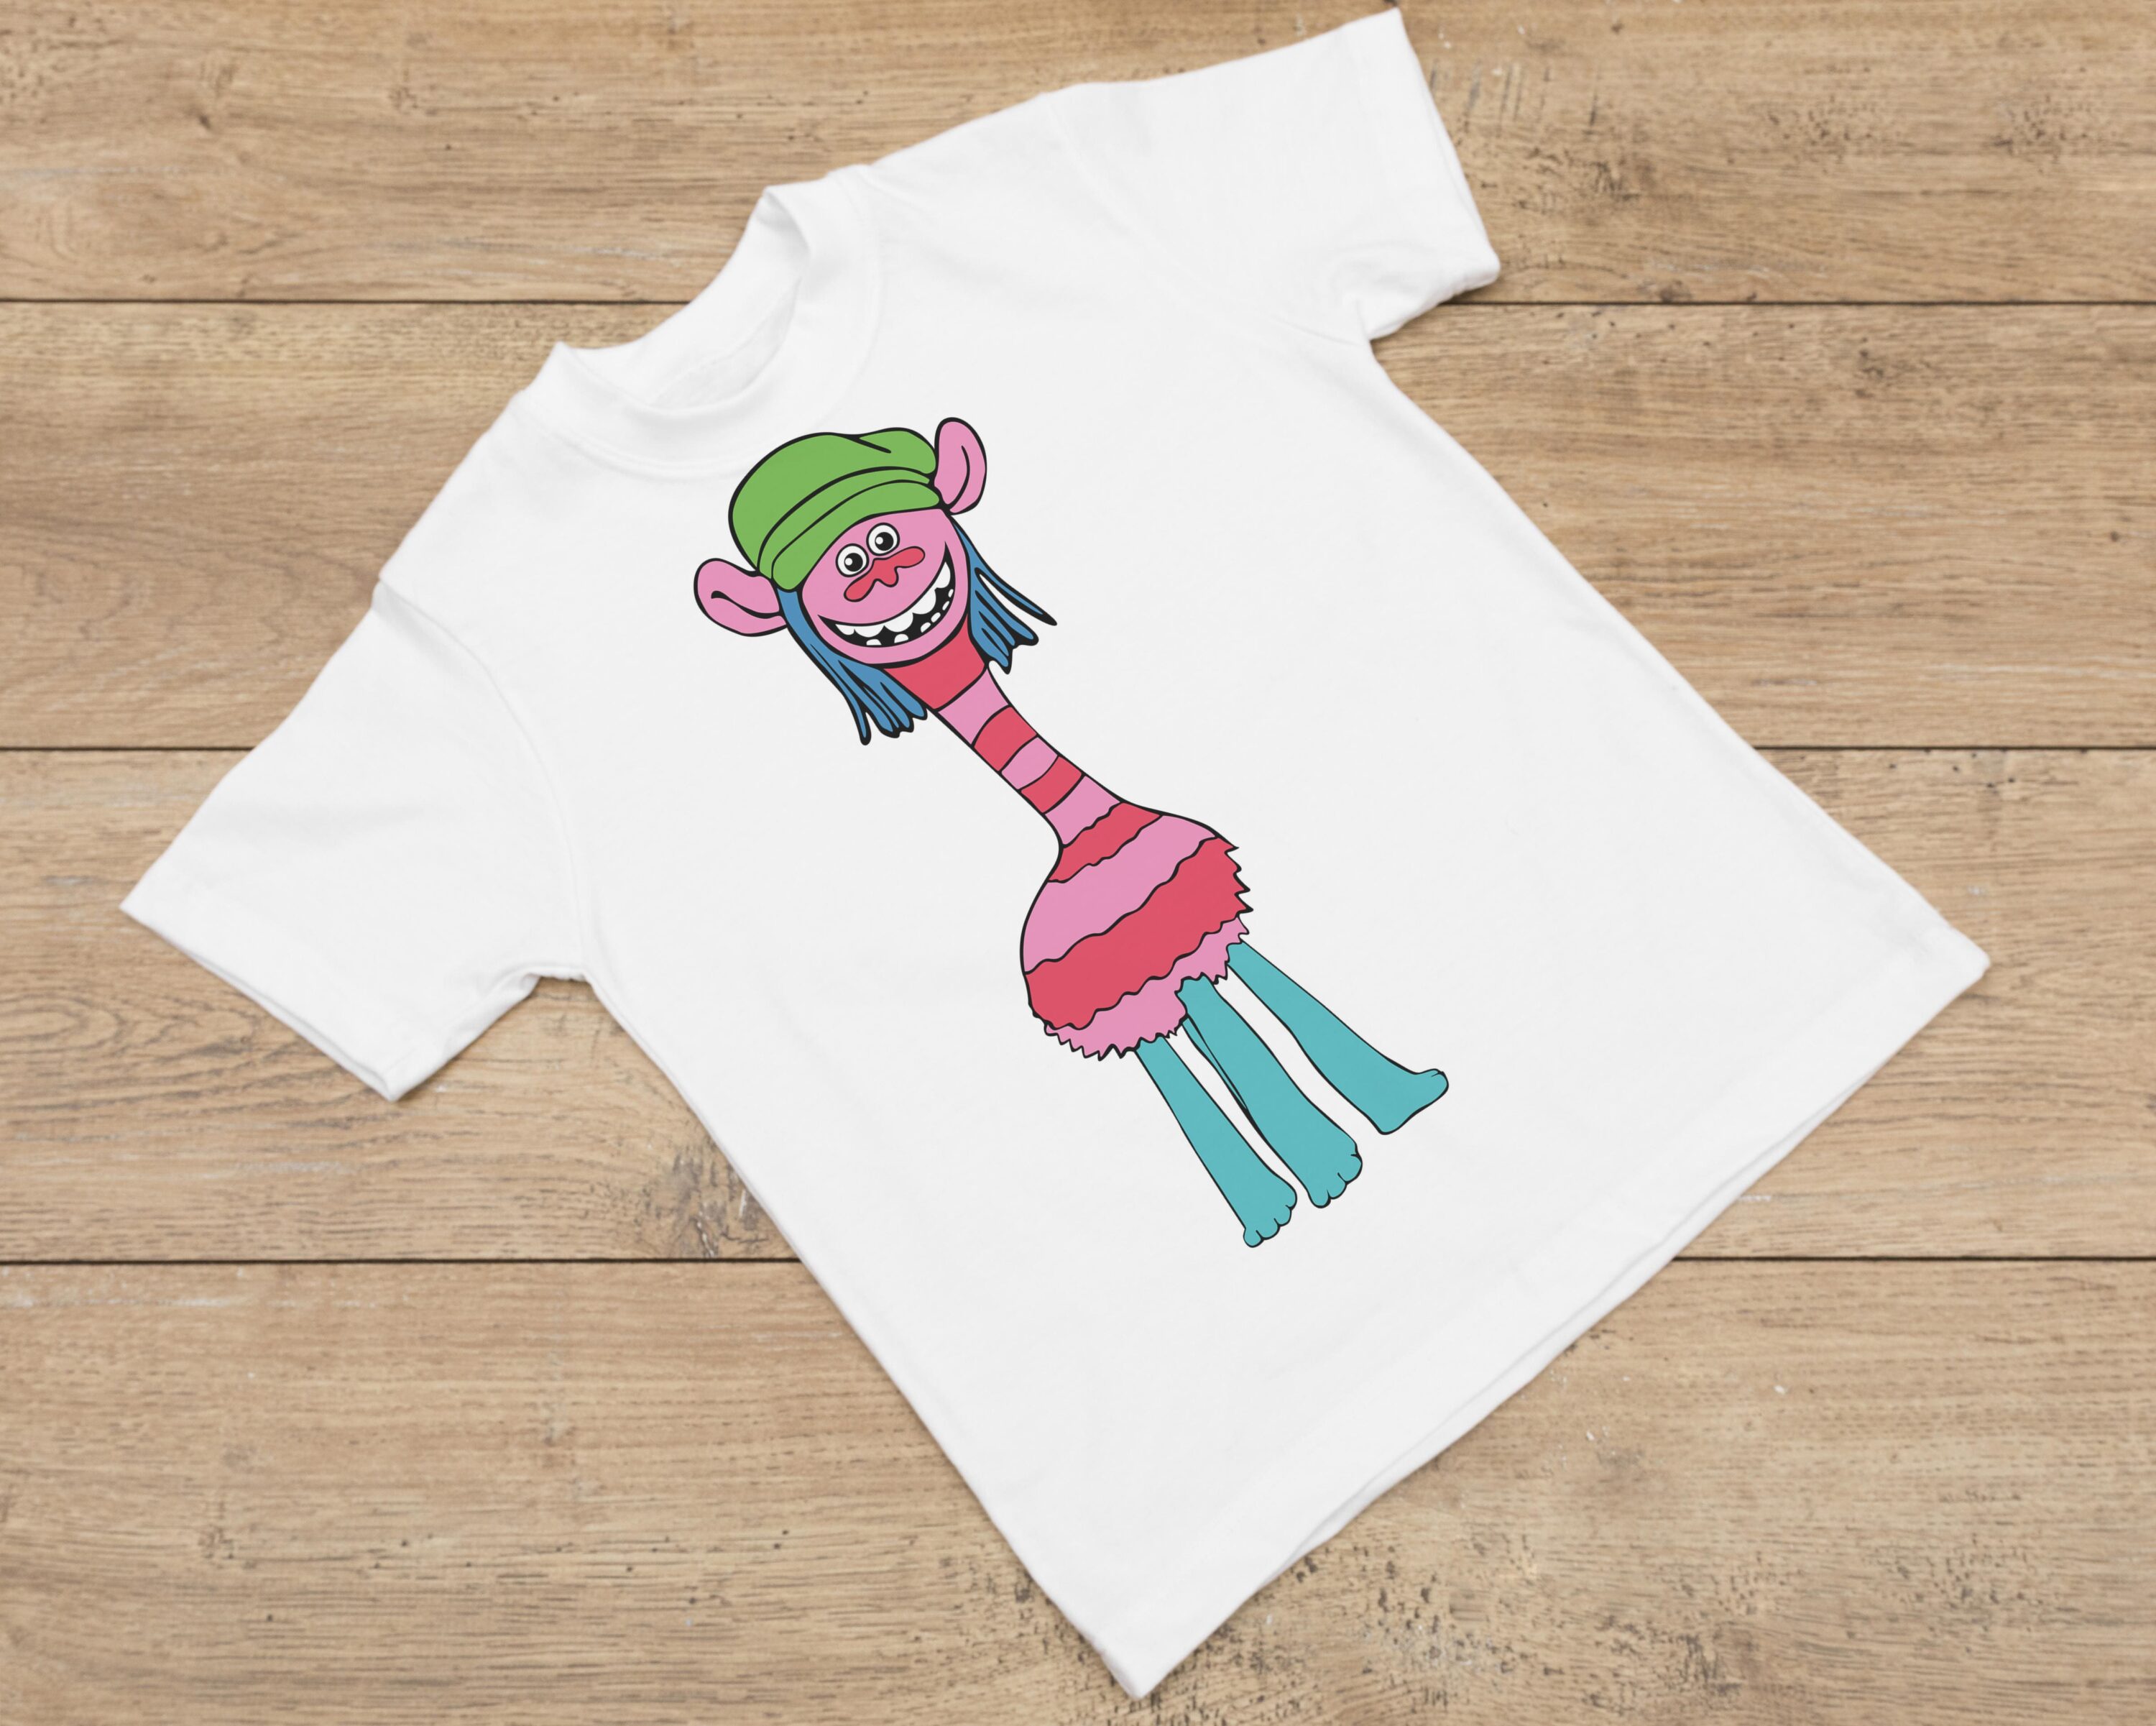 White T-shirt with image of cartoon character - Cooper.